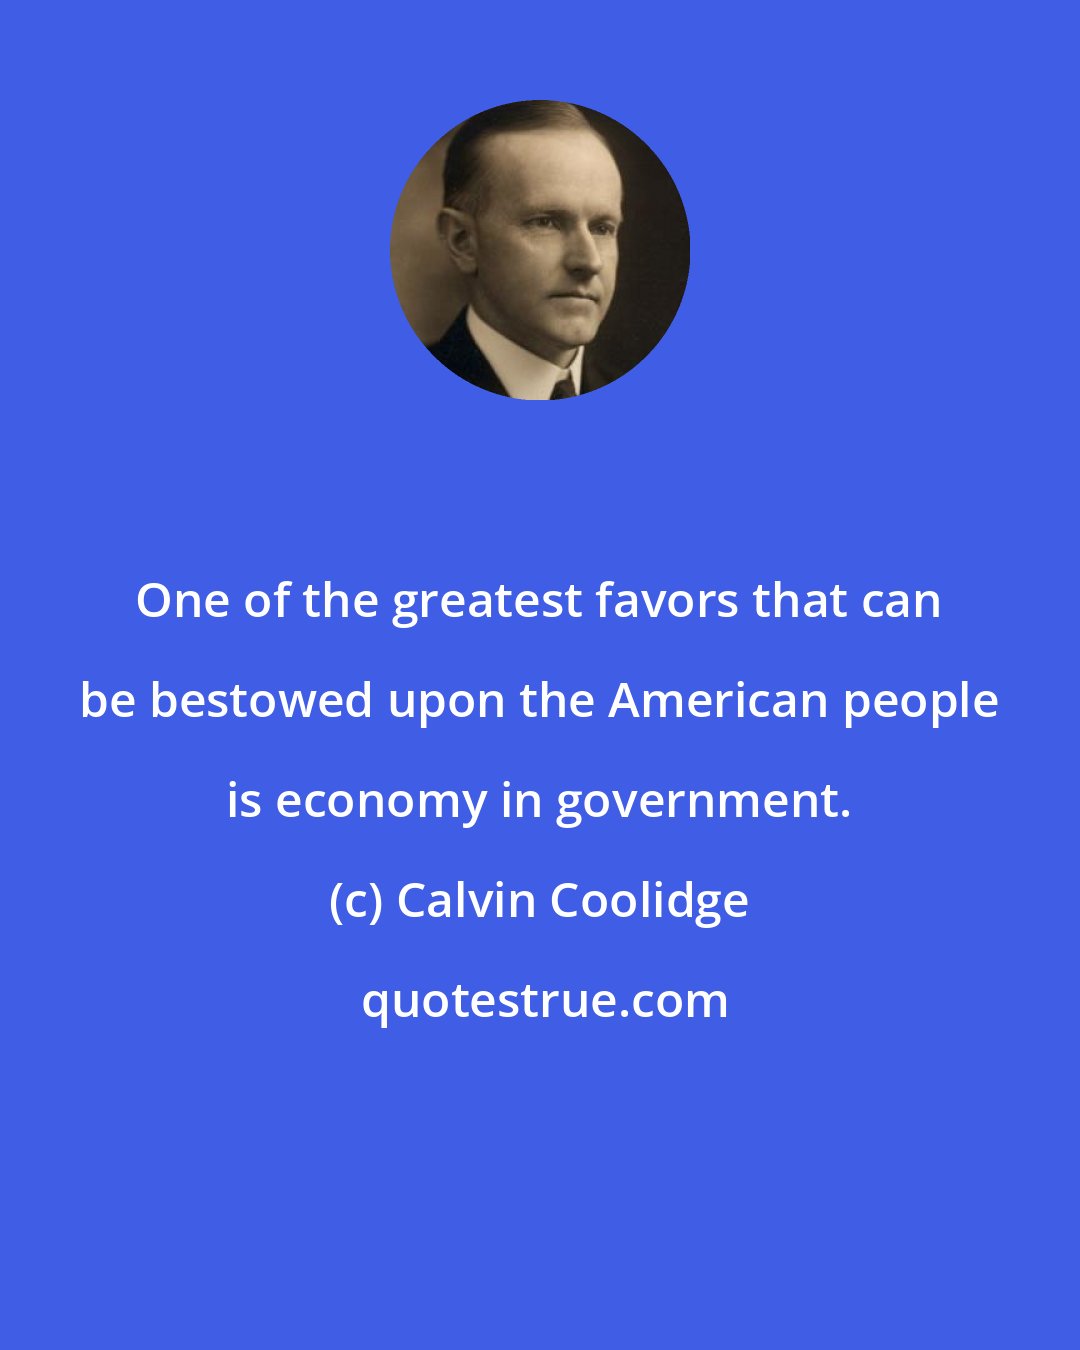 Calvin Coolidge: One of the greatest favors that can be bestowed upon the American people is economy in government.